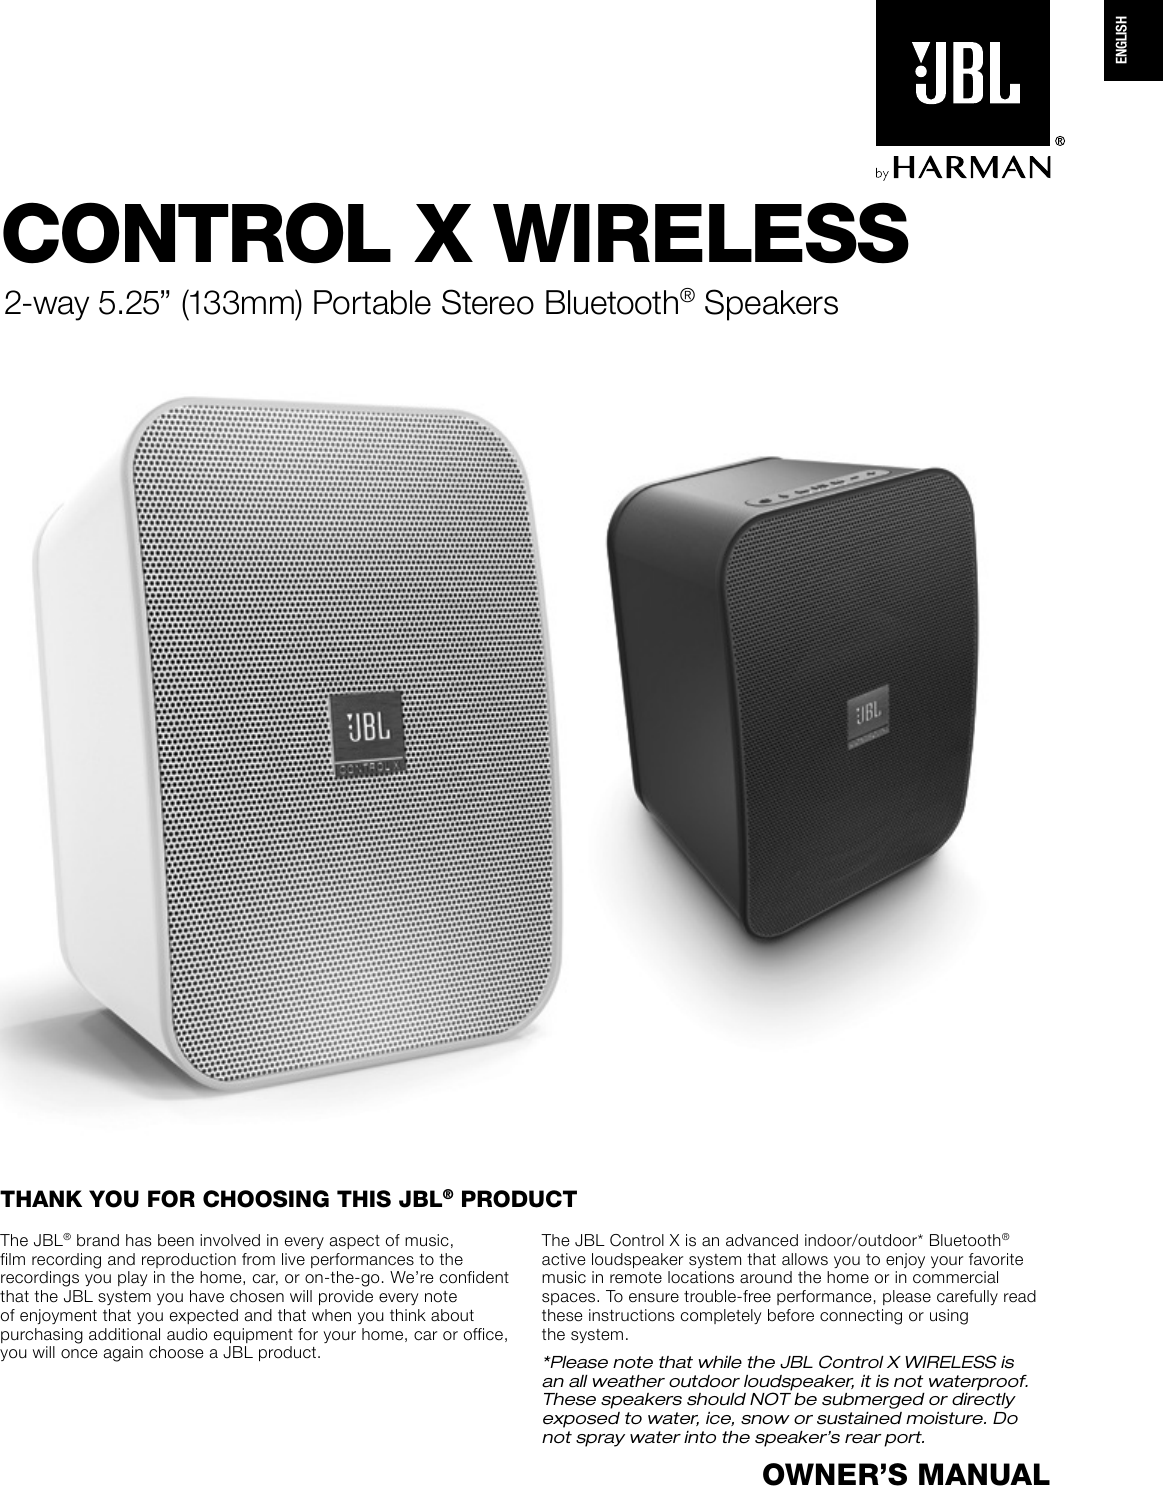 CONTROL X WIRELESS2-way 5.25” (133mm) Portable Stereo Bluetooth® SpeakersOWNER’S MANUALThe JBL® brand has been involved in every aspect of music, film recording and reproduction from live performances to the recordings you play in the home, car, or on-the-go. We’re confident that the JBL system you have chosen will provide every note of enjoyment that you expected and that when you think about purchasing additional audio equipment for your home, car or office, you will once again choose a JBL product.The JBL Control X is an advanced indoor/outdoor* Bluetooth® active loudspeaker system that allows you to enjoy your favorite music in remote locations around the home or in commercial spaces. To ensure trouble-free performance, please carefully read these instructions completely before connecting or using  the system. *Please note that while the JBL Control X WIRELESS is an all weather outdoor loudspeaker, it is not waterproof. These speakers should NOT be submerged or directly exposed to water, ice, snow or sustained moisture. Do not spray water into the speaker’s rear port.THANK YOU FOR CHOOSING THIS JBL® PRODUCTENGLISH